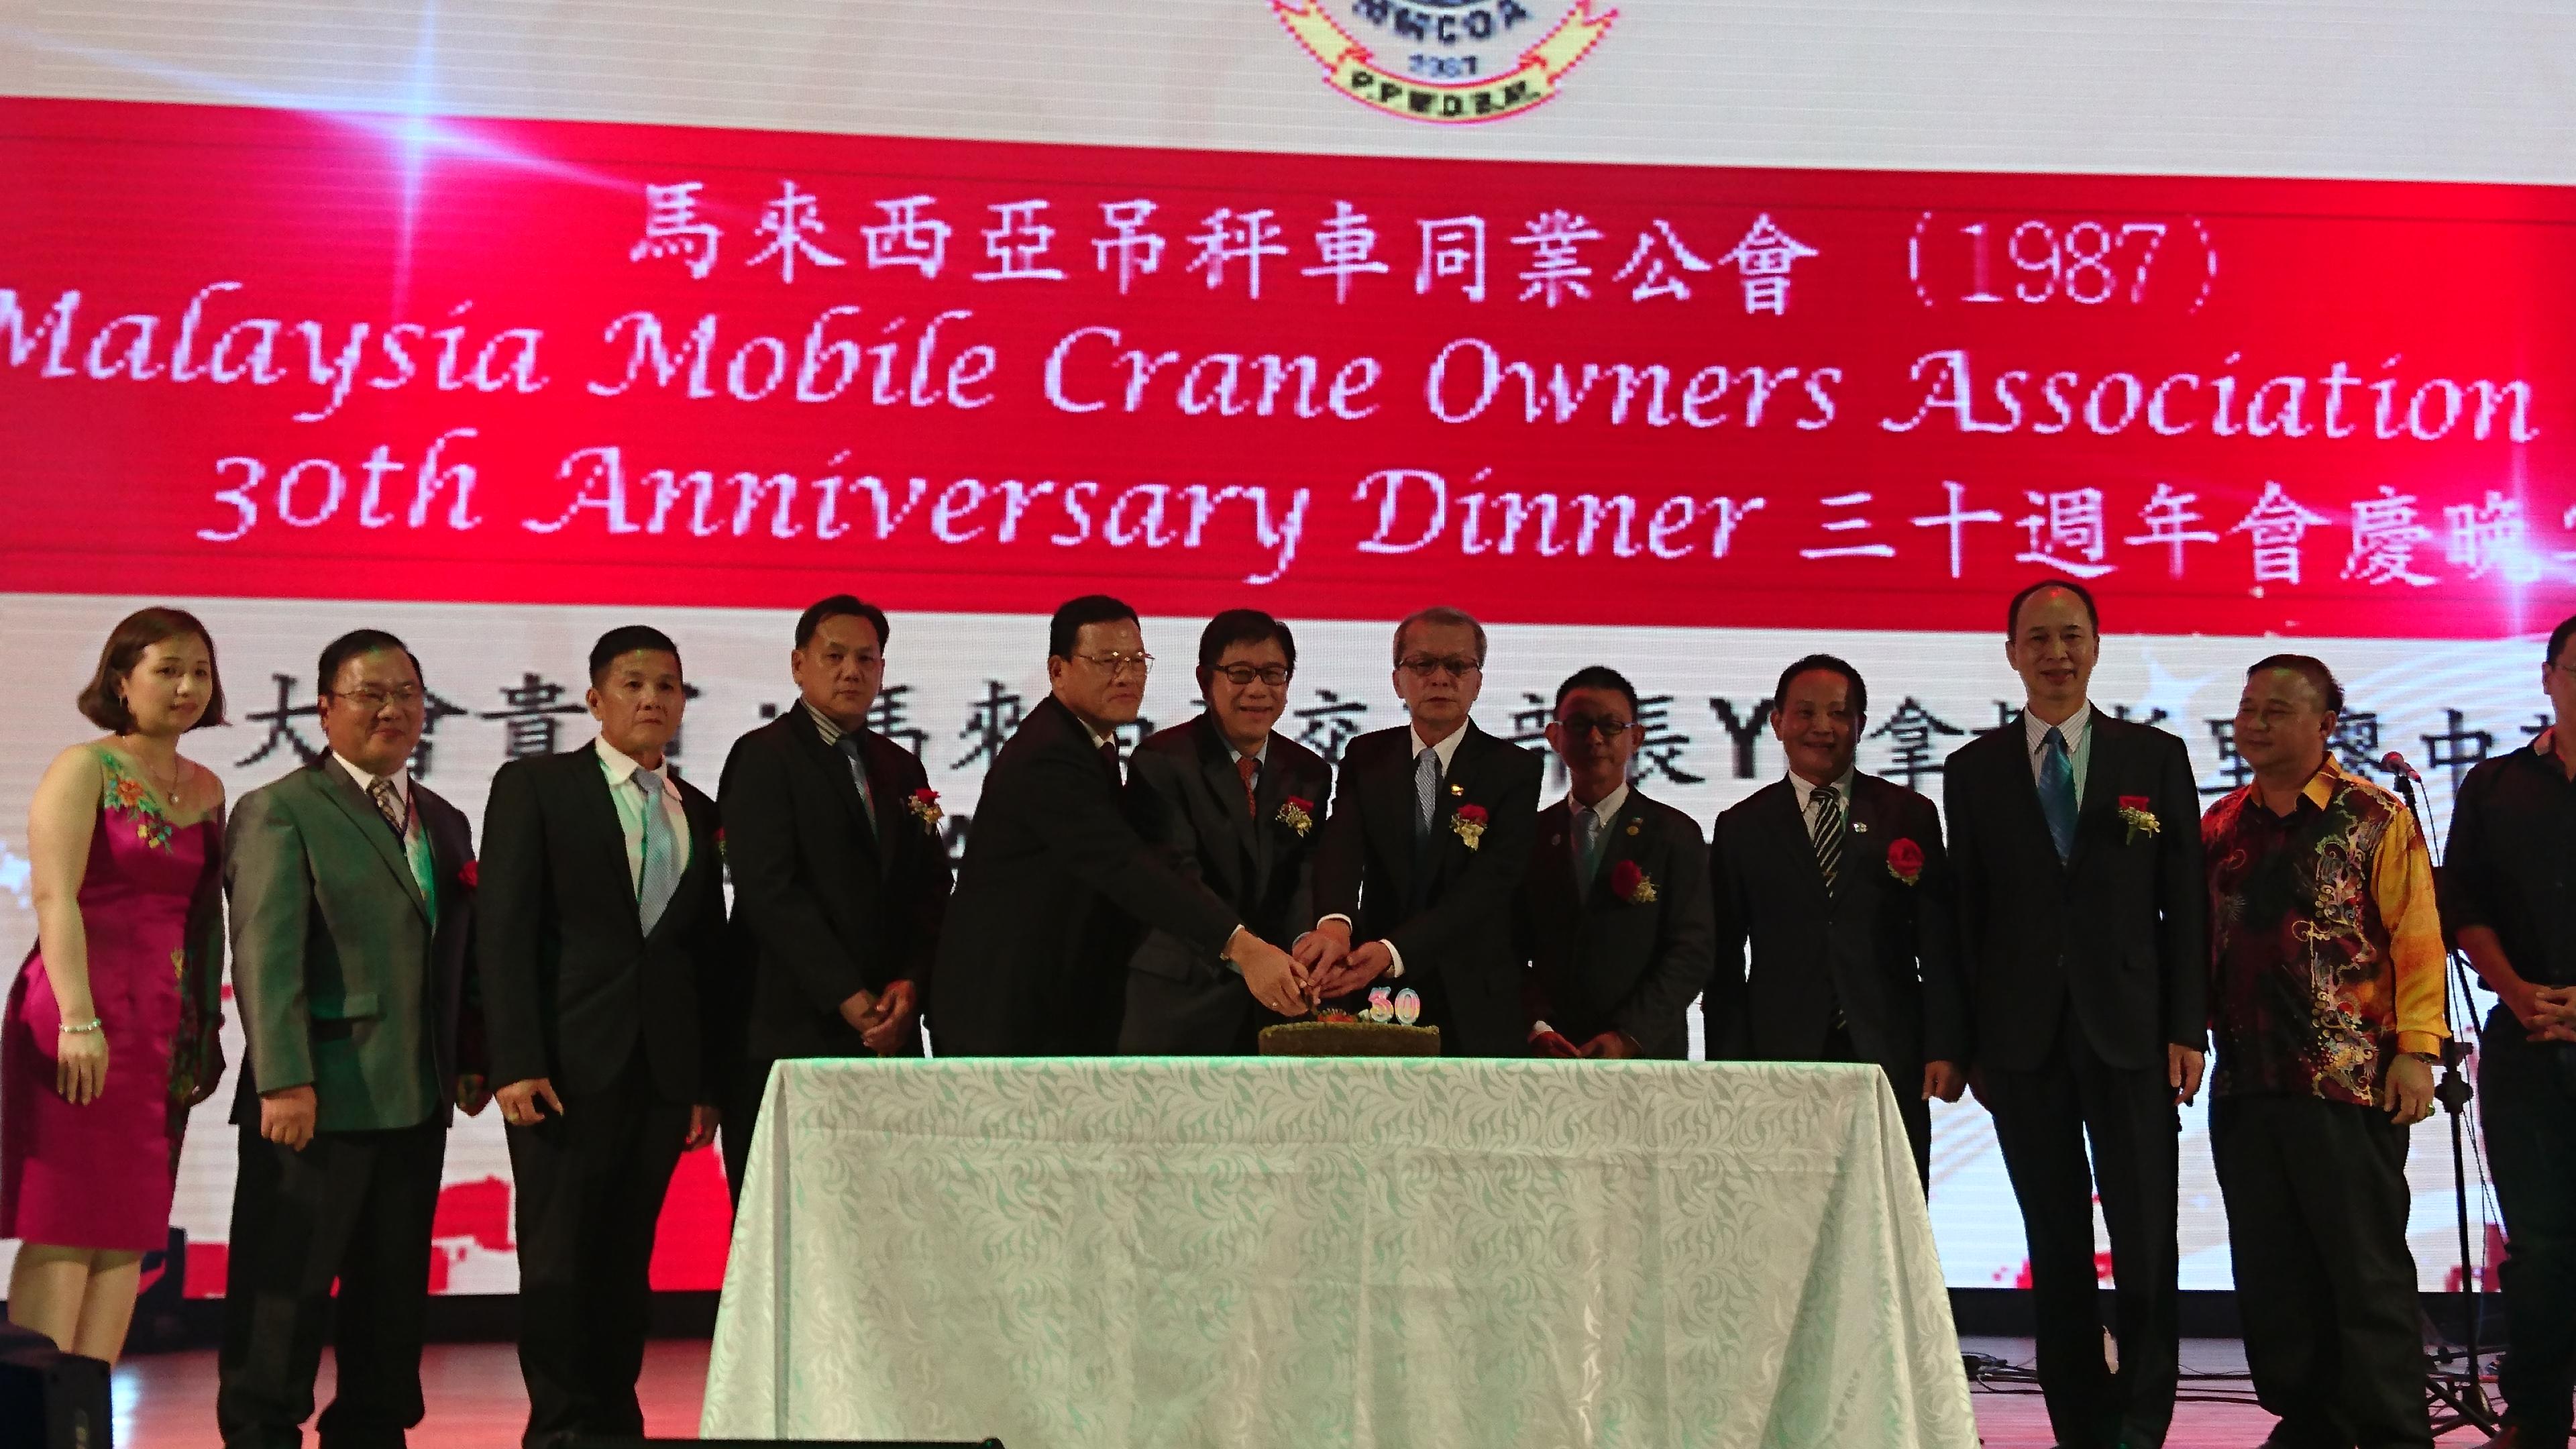 Representative Chang, James Chi-ping attends the Malaysia Mobile Crane Owners Association 30th Anniversary Dinner on April 22, 2017.
